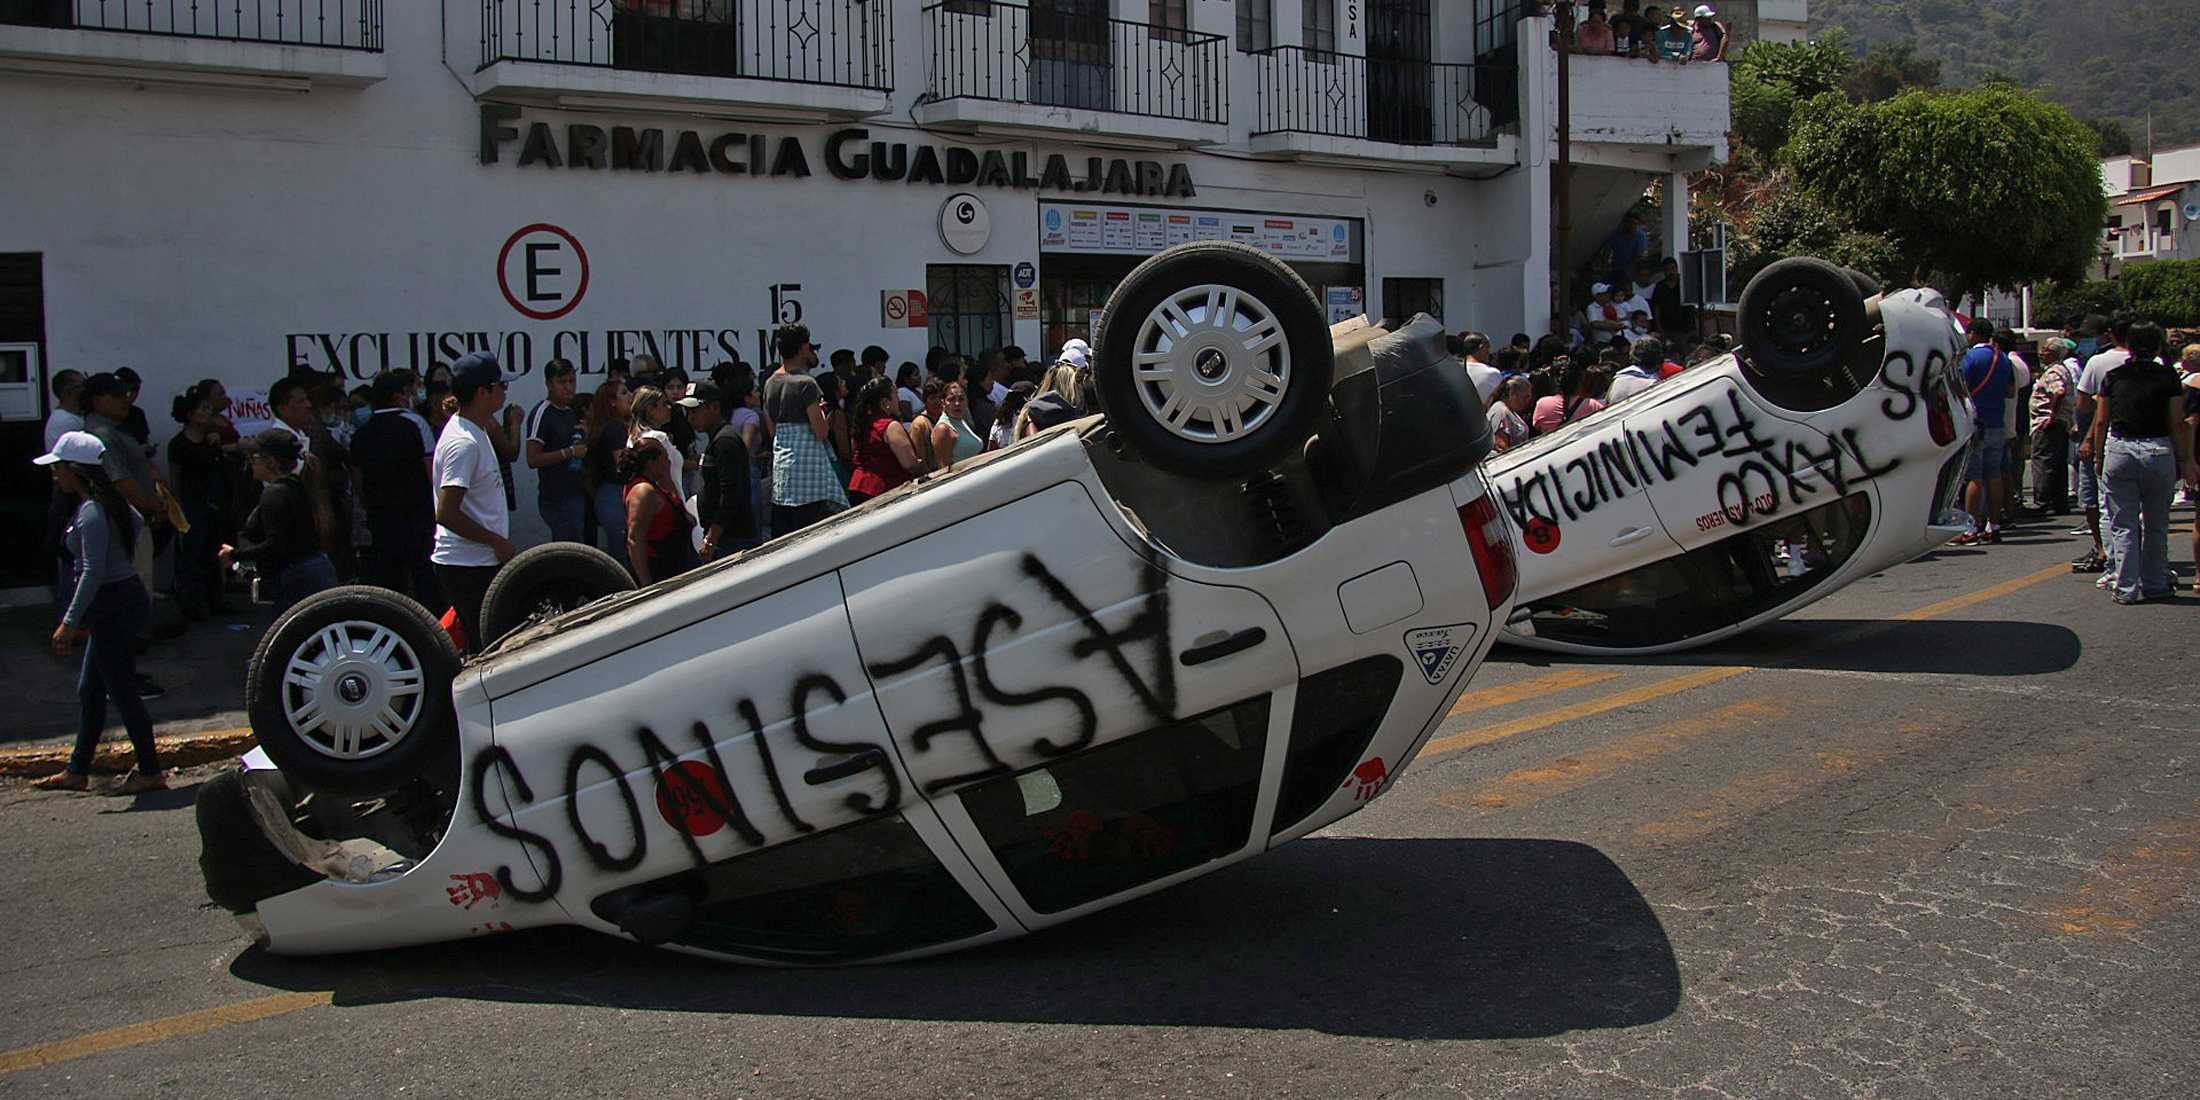 Two cars lie upside down on the road and are spray-painted with words like 